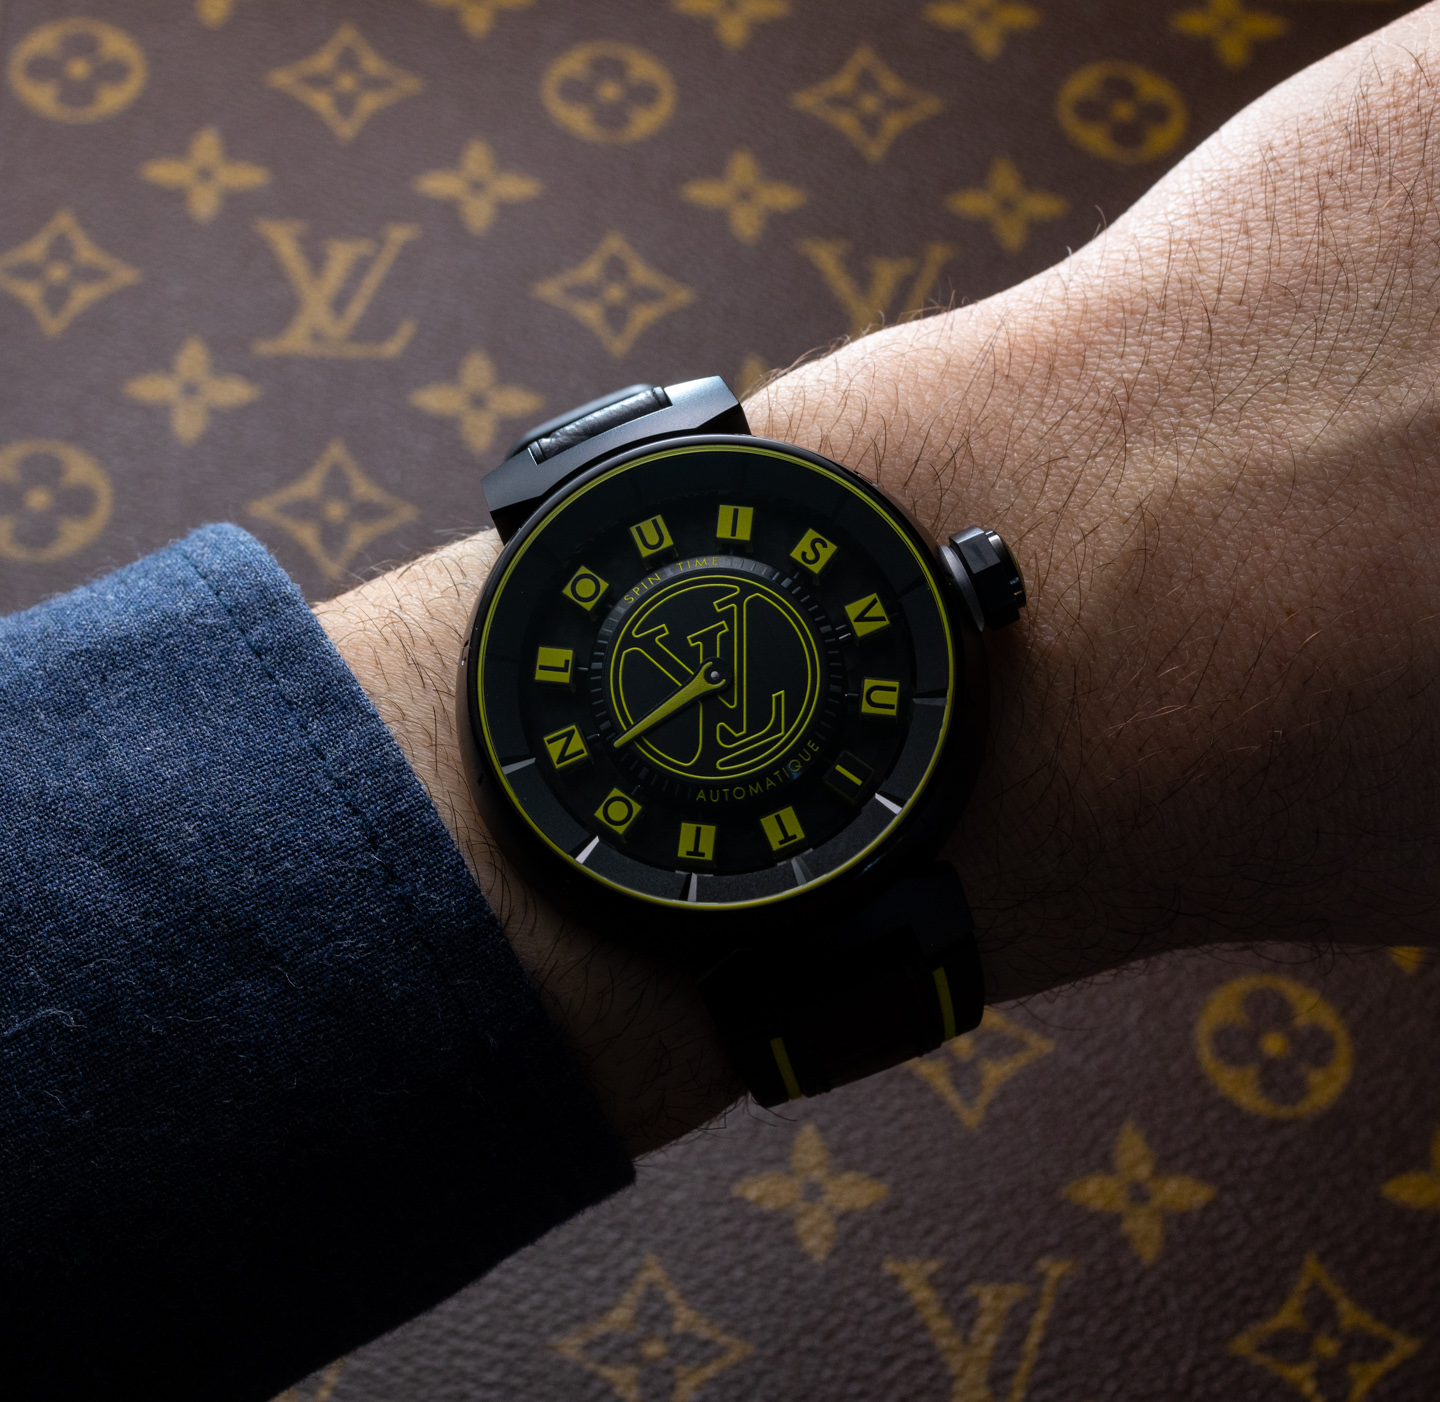 Louis Vuitton revisits the Tambour Spin Time Air watch to celebrate the  20th anniversary of its watch division